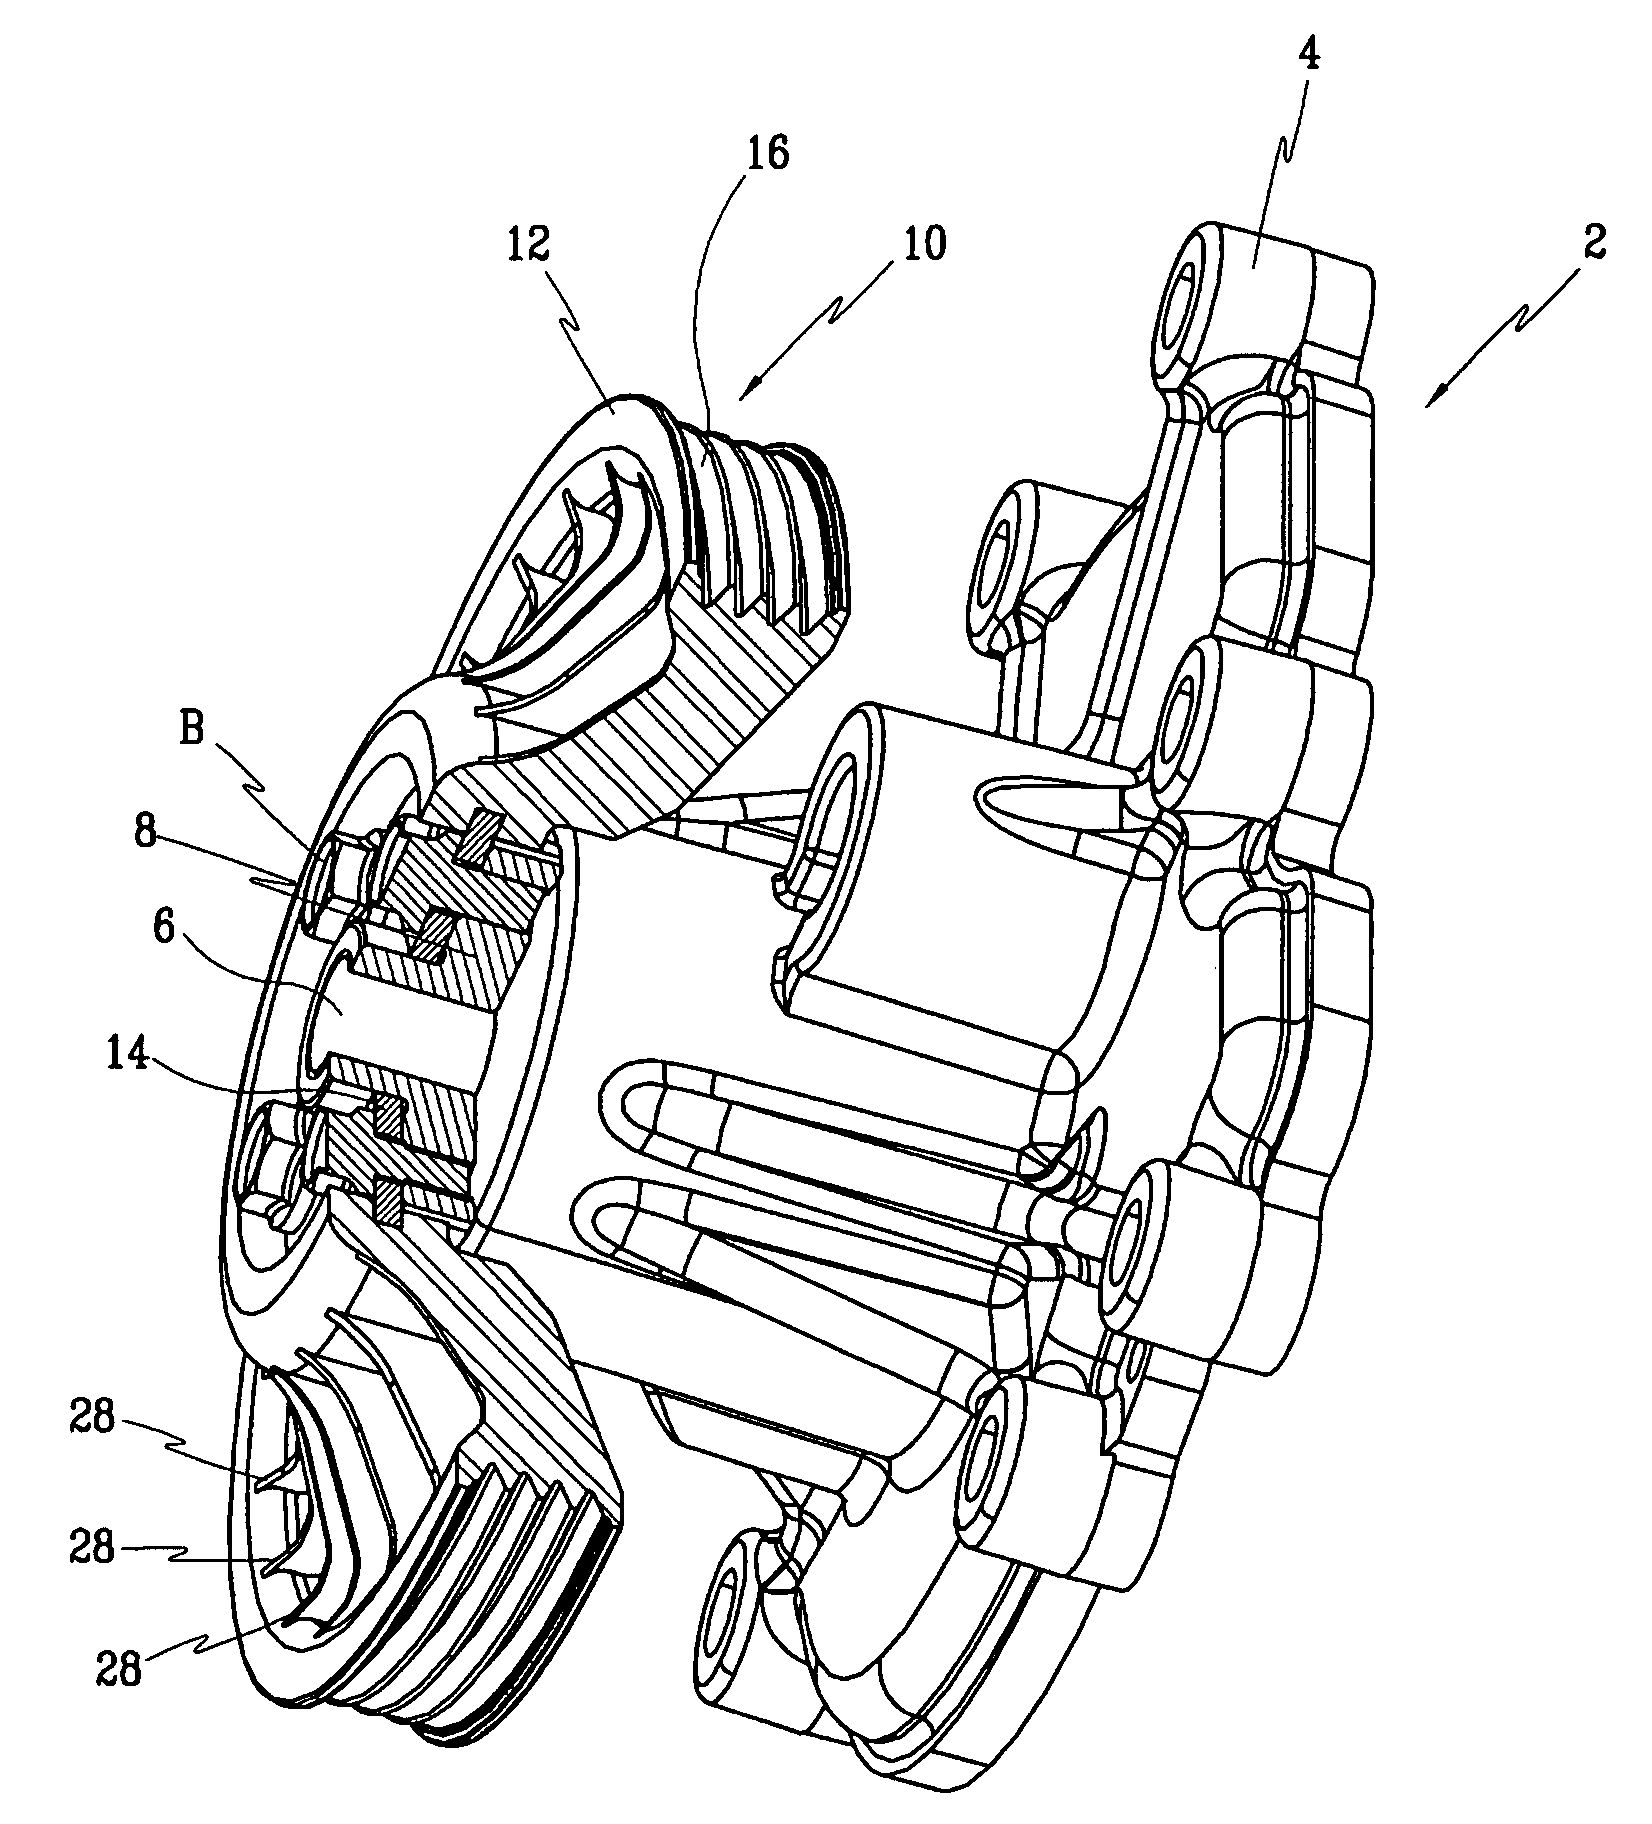 Water pump pulley for cooling system of vehicle